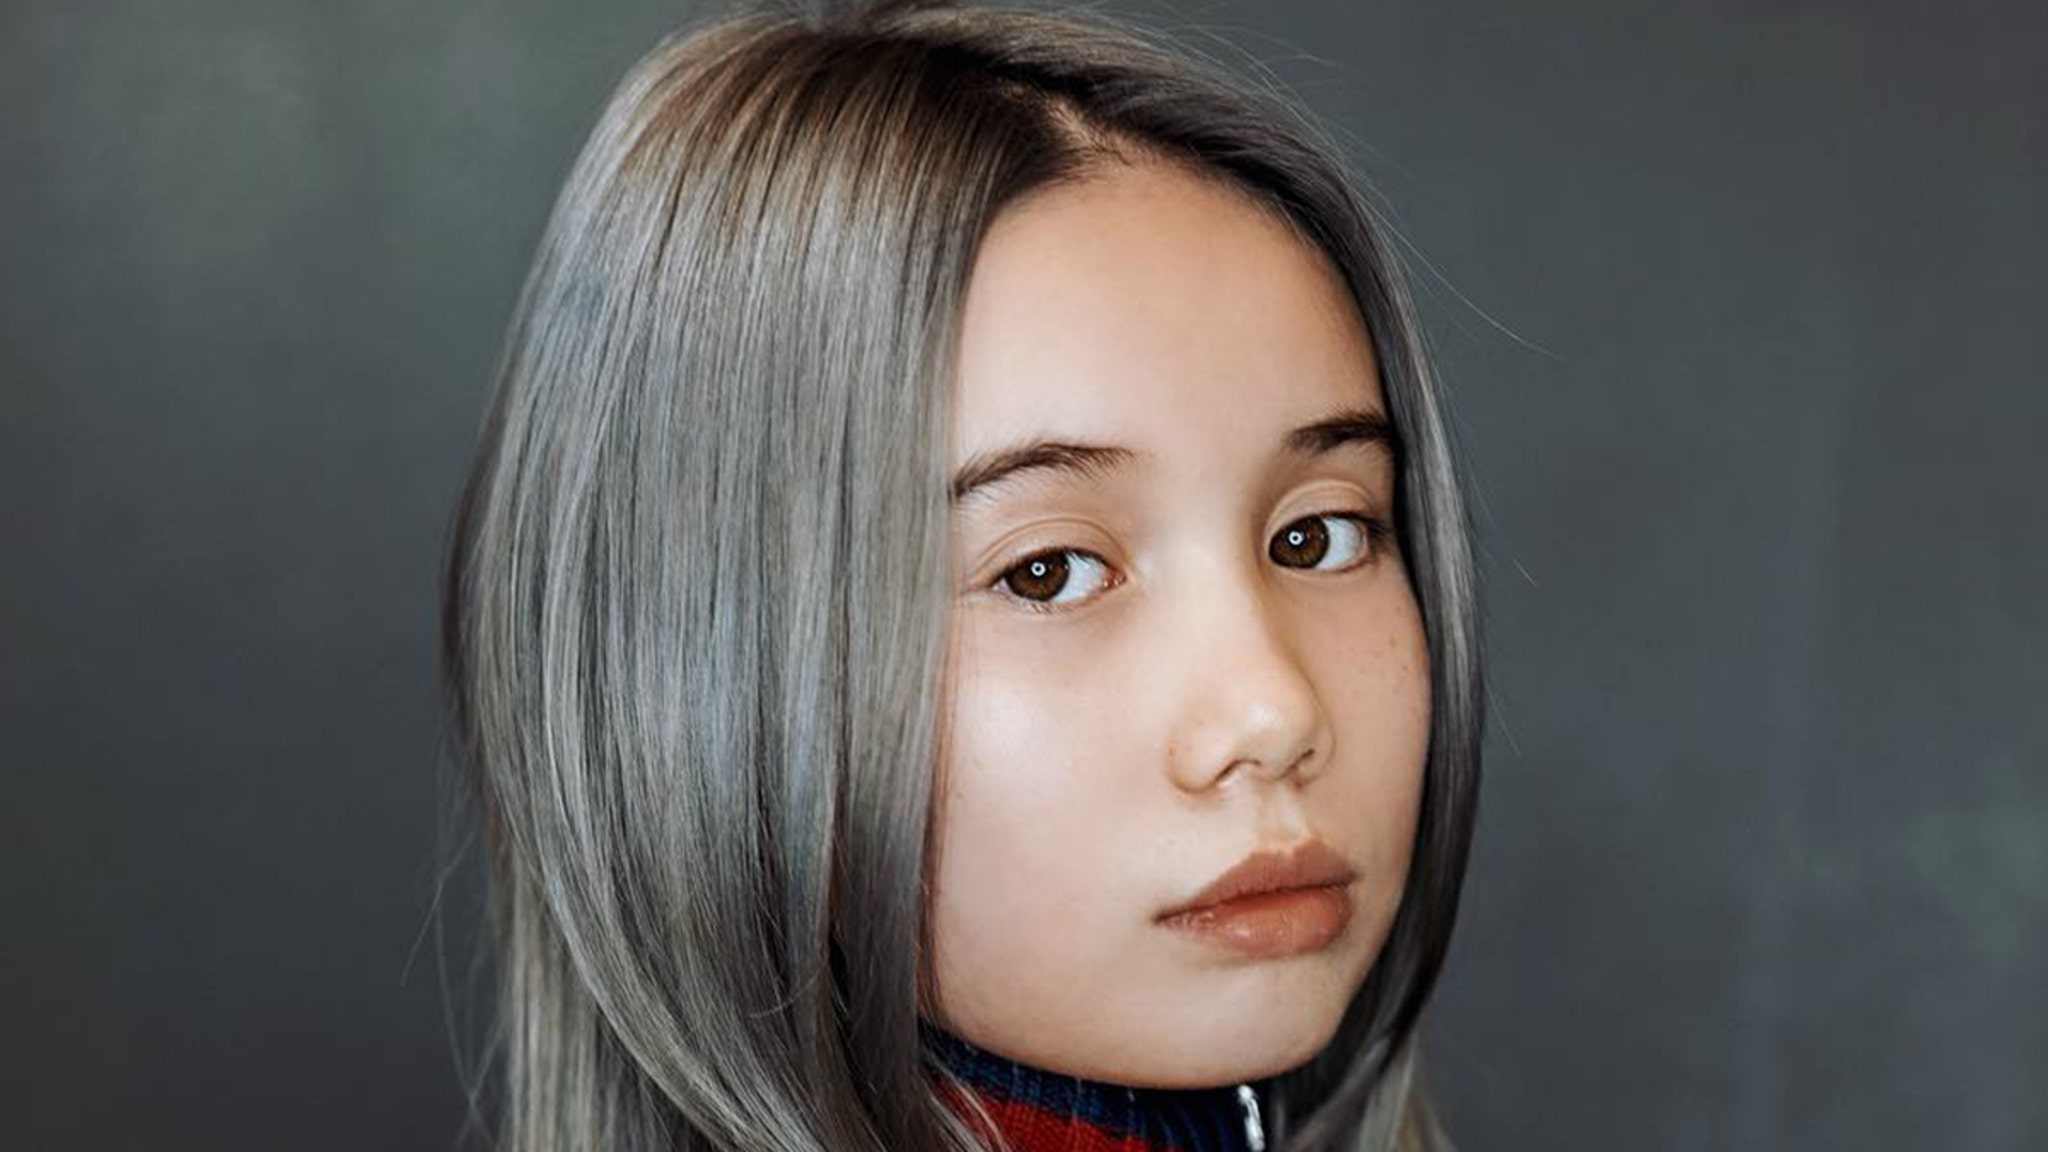 Lil Tay is not dead, claims social media was hacked